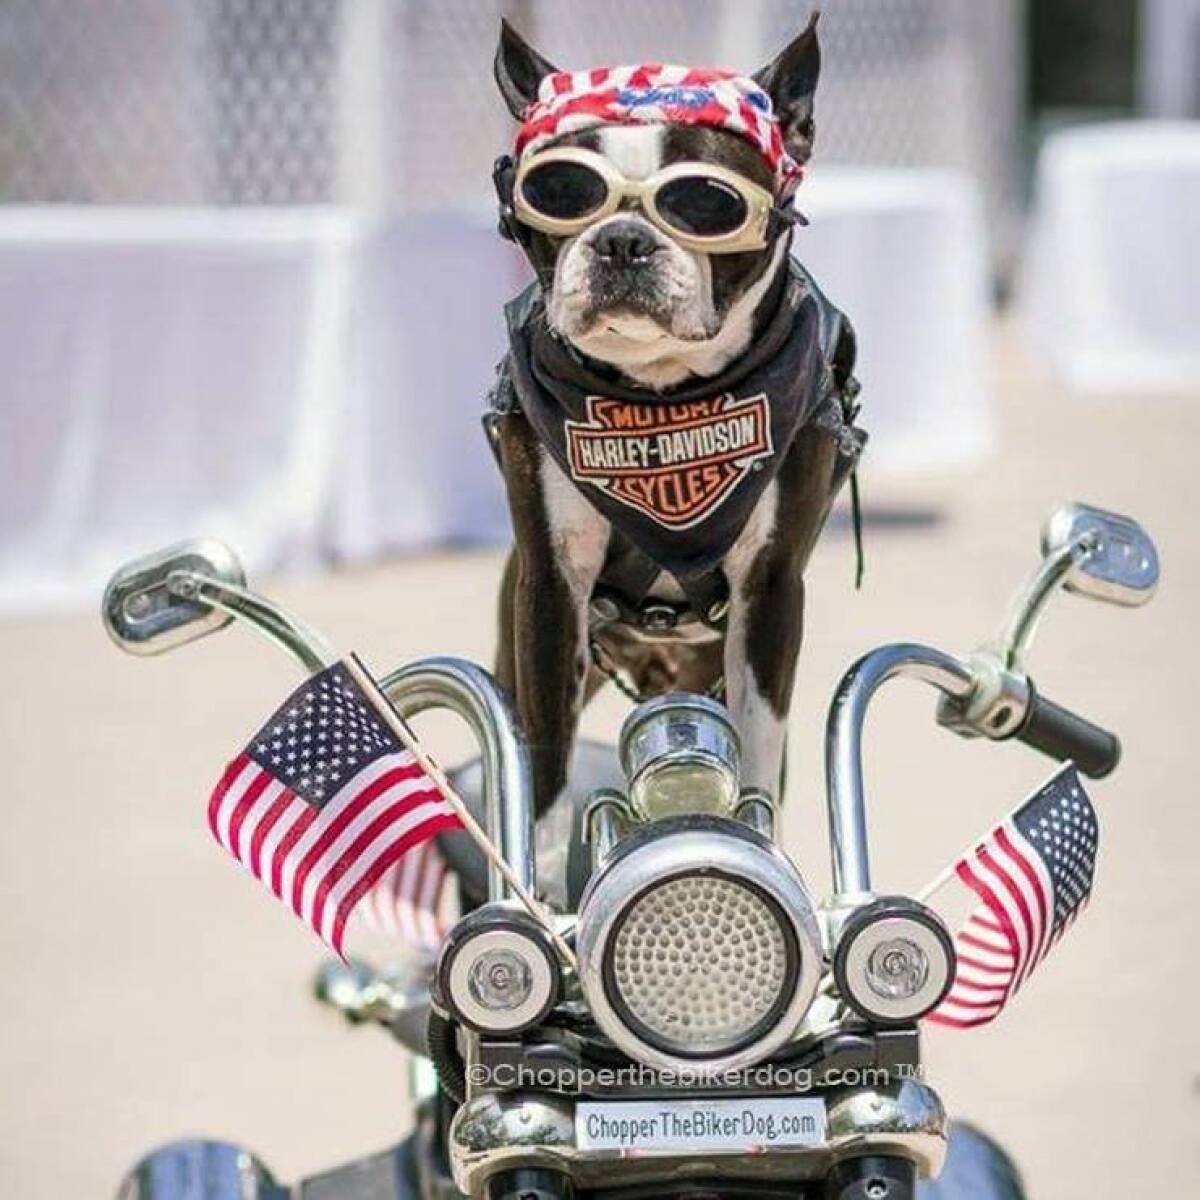 Chopper, the biker dog, has given up riding motorcycles due to health setbacks, but he still is doing San Diego charity work.